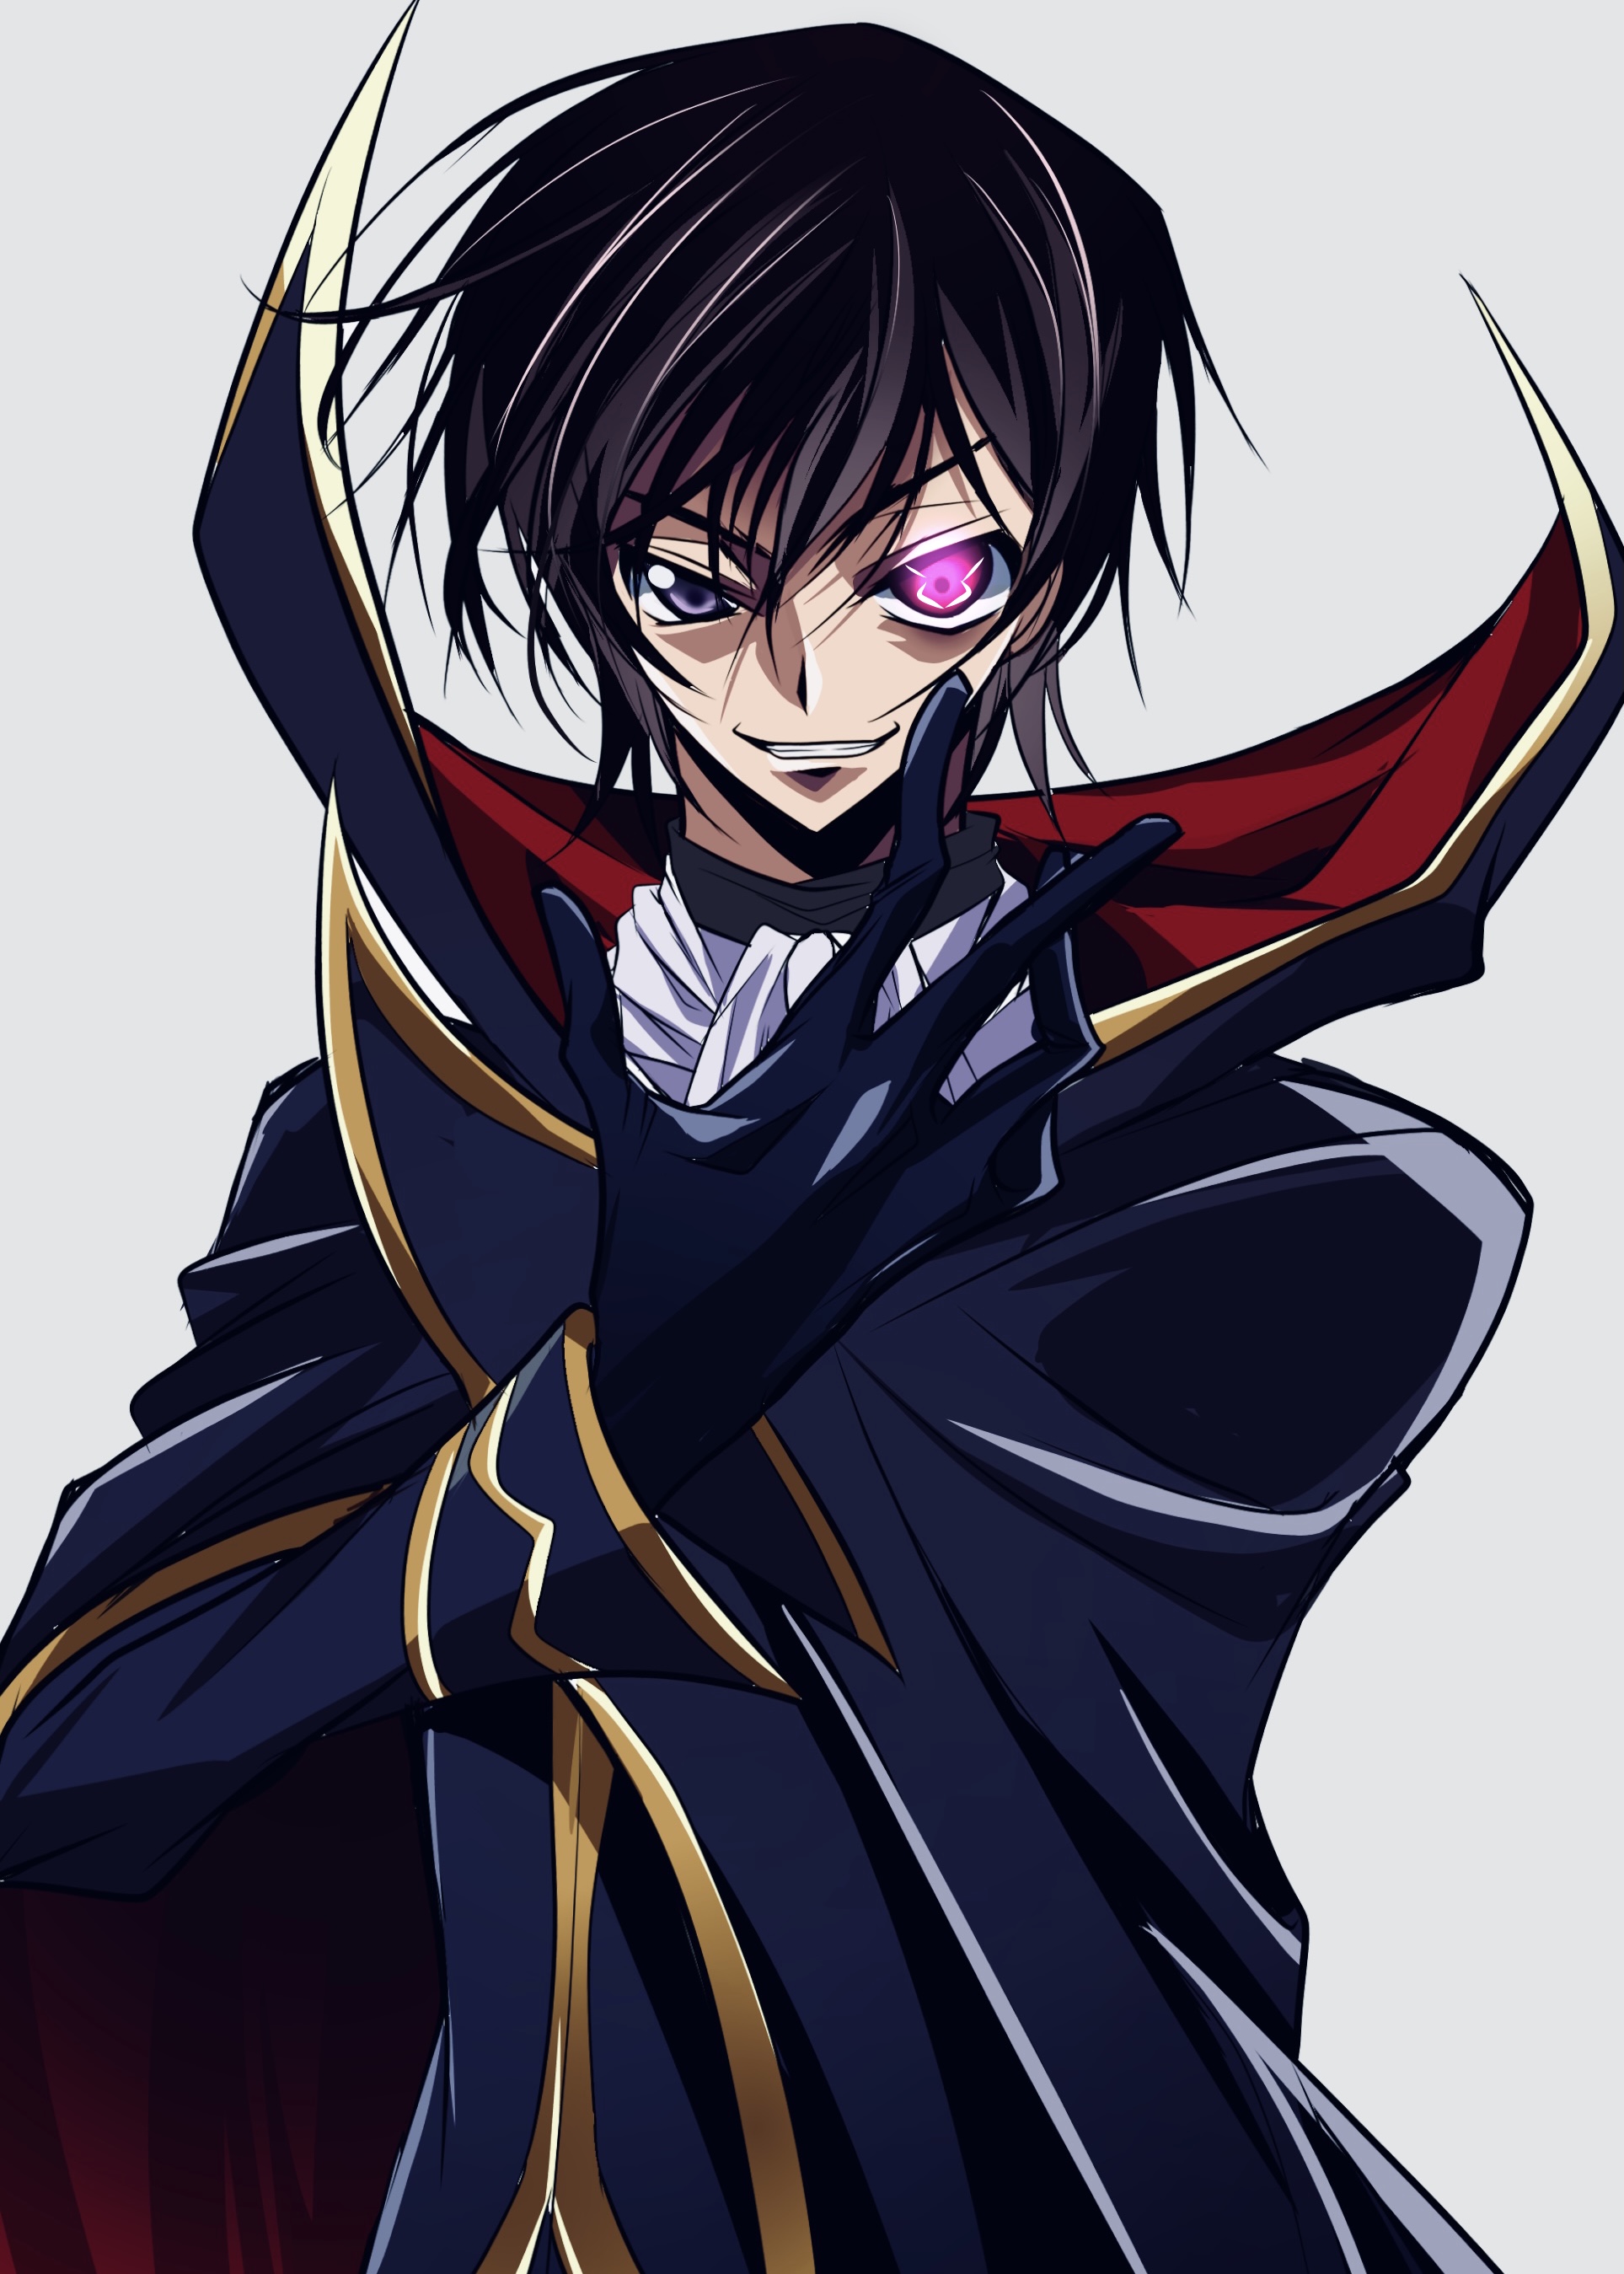 Why Lelouch Is the Most Popular Anime Character-demhanvico.com.vn